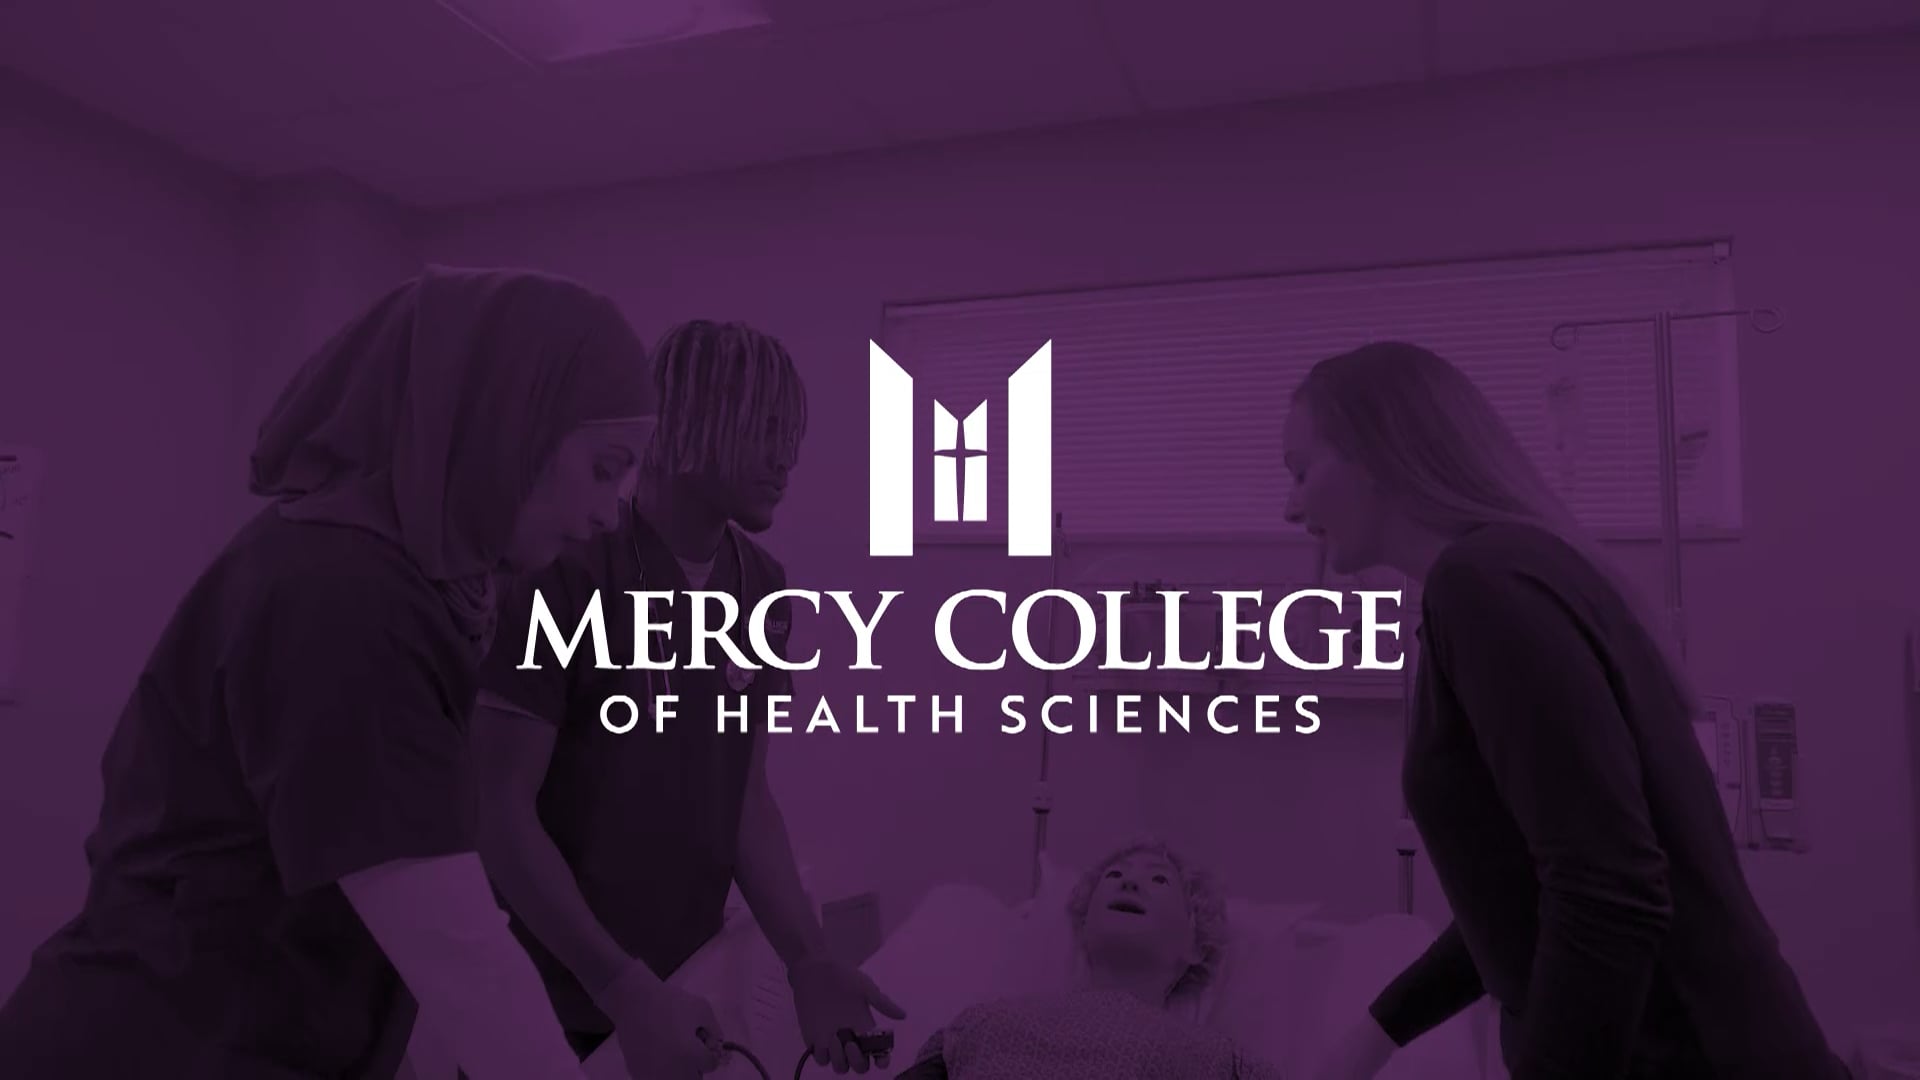 Mercy College of Health Sciences - Hype Video